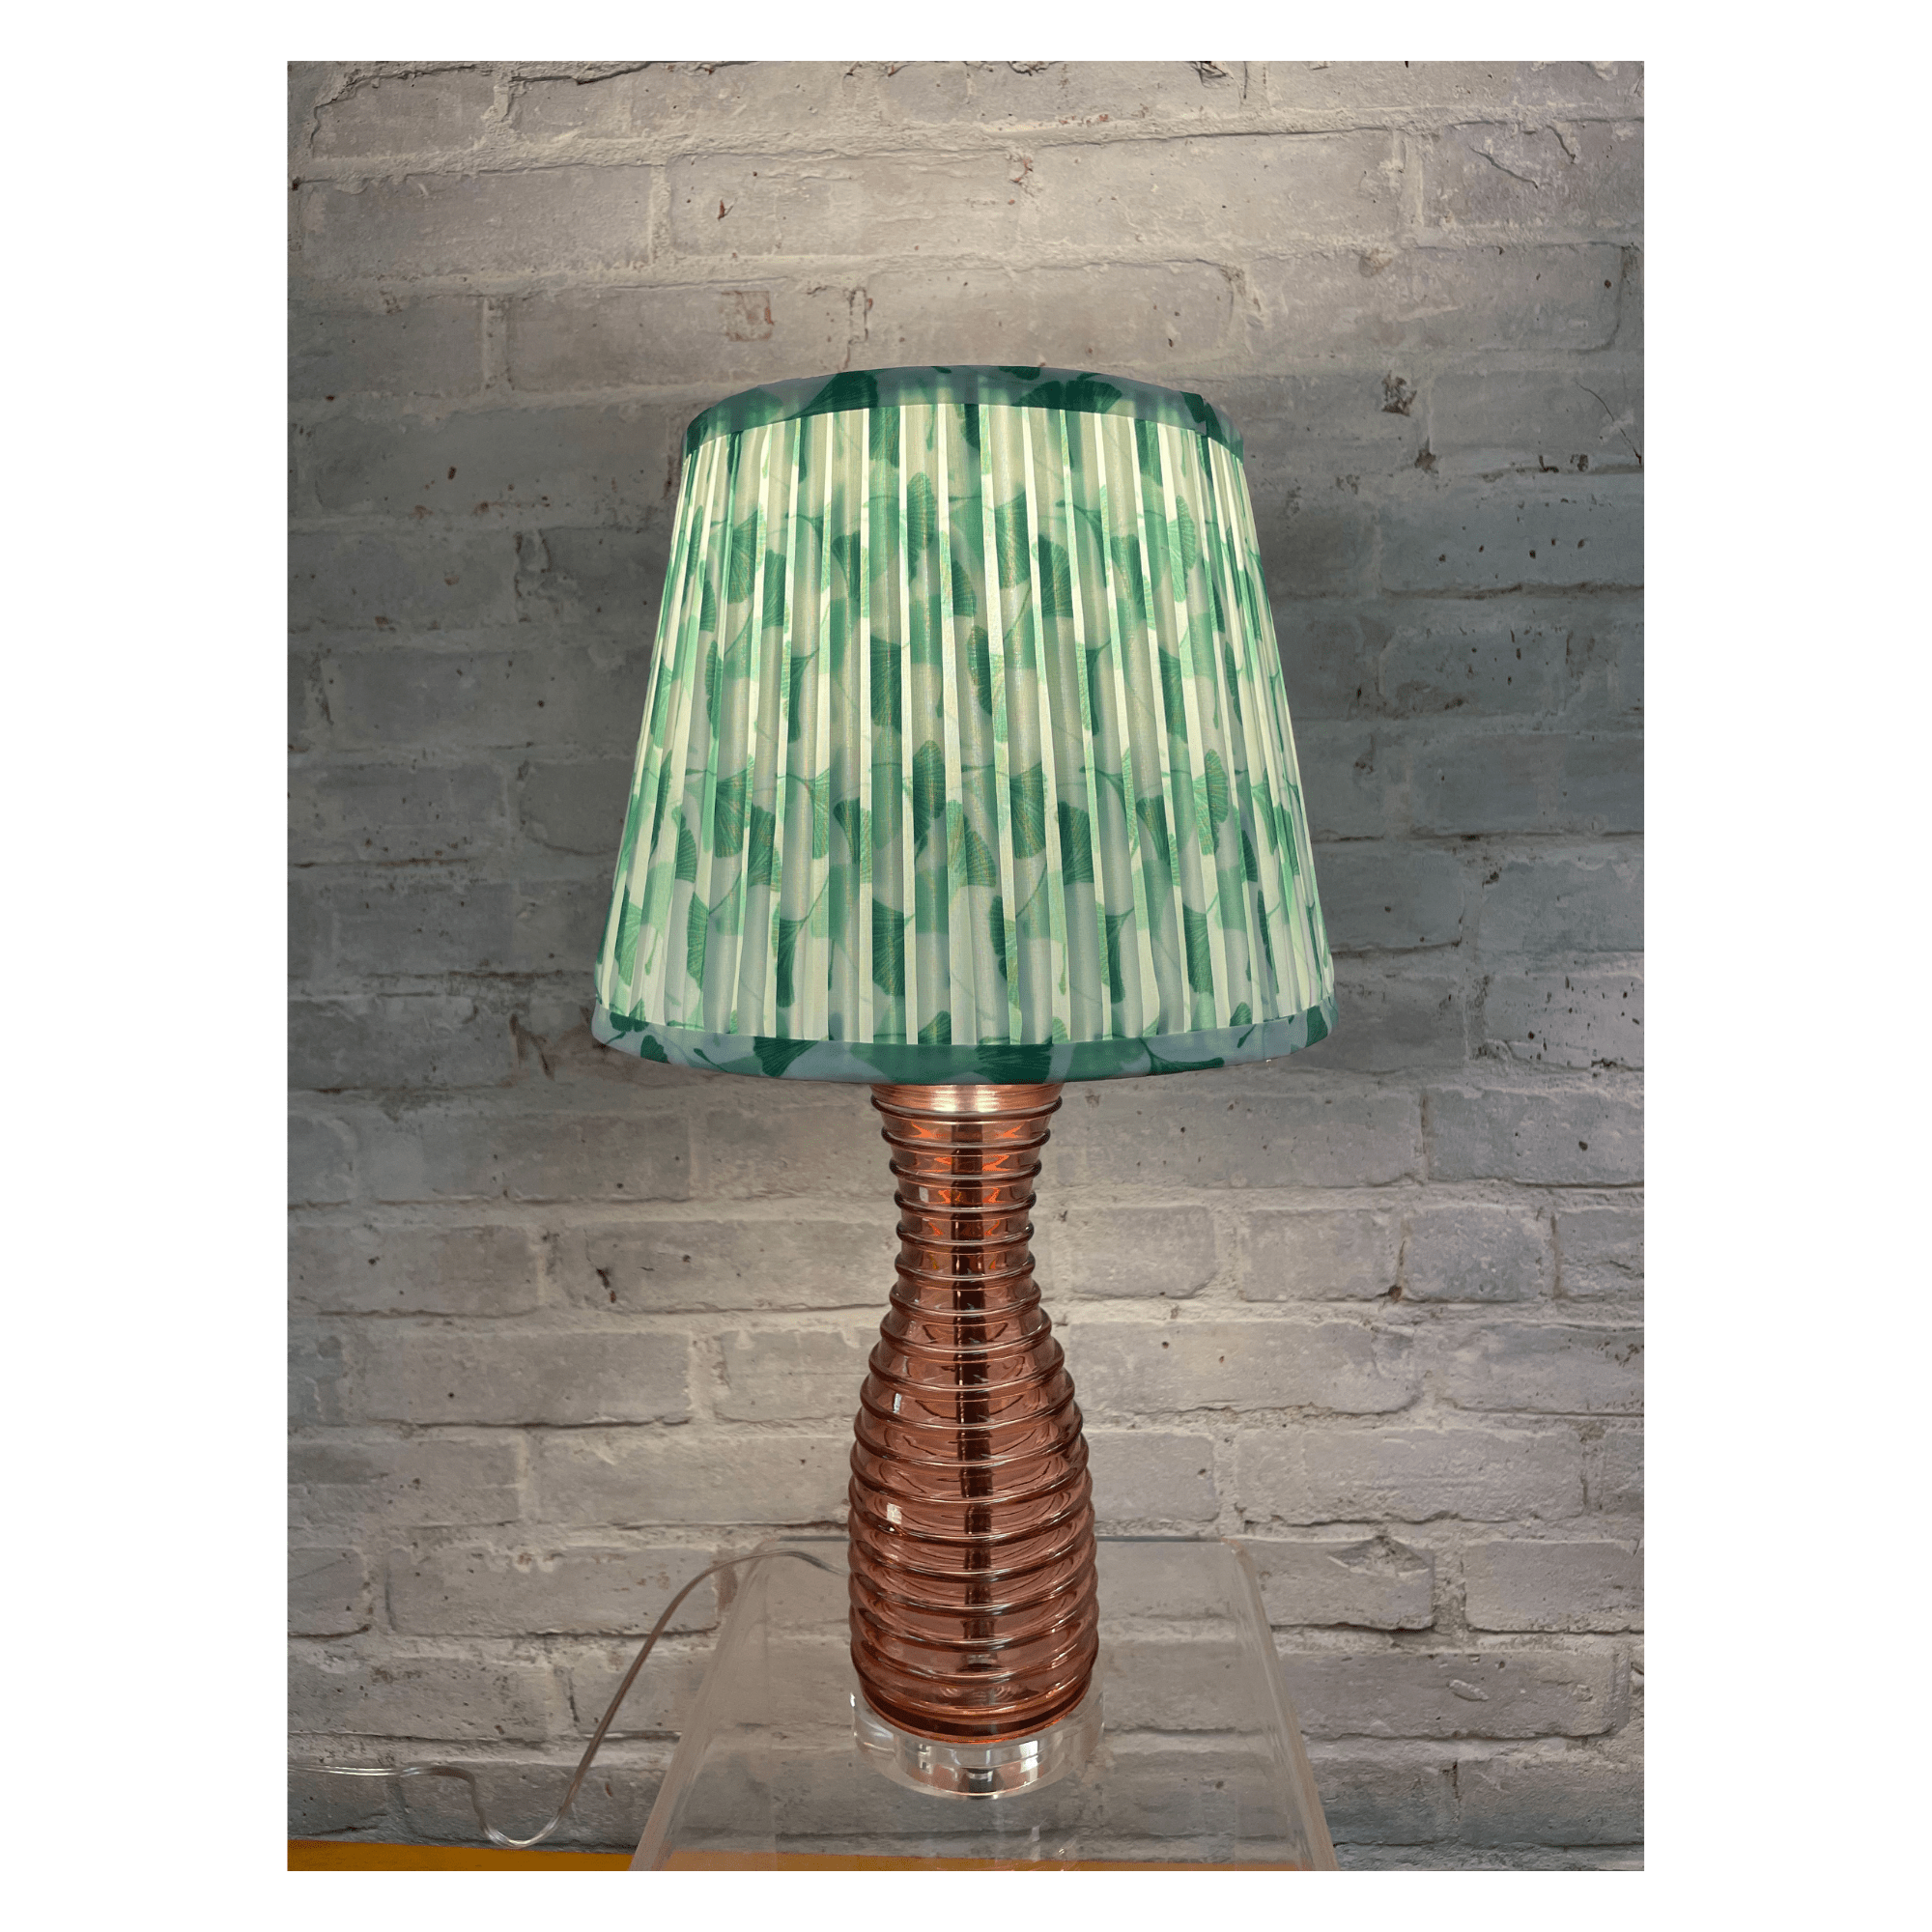 LAMP SHADE SOLUTION lampshade Modern Softback Euro Green Leaves Pleated Lampshade - Size: 8 x 11 x 8.5'' (Lamp Not Included)